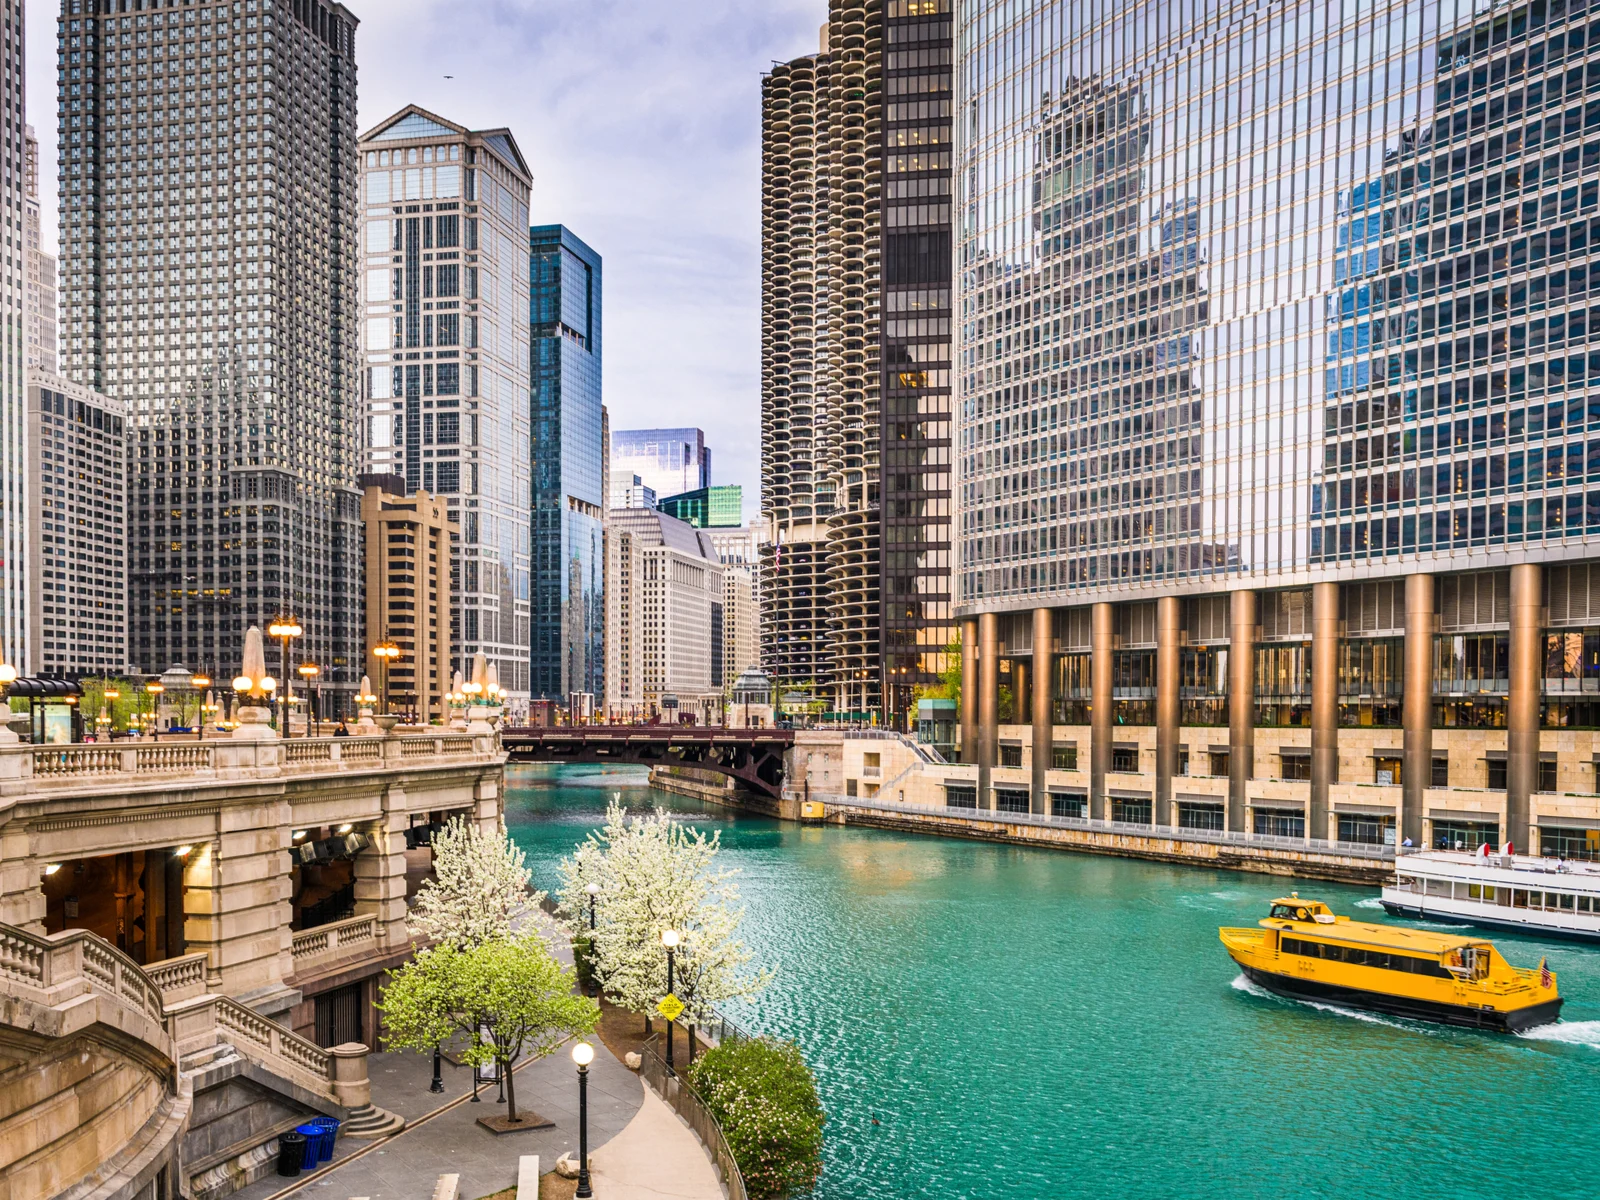 Riverwalk pictured during the overall best time to visit Chicago